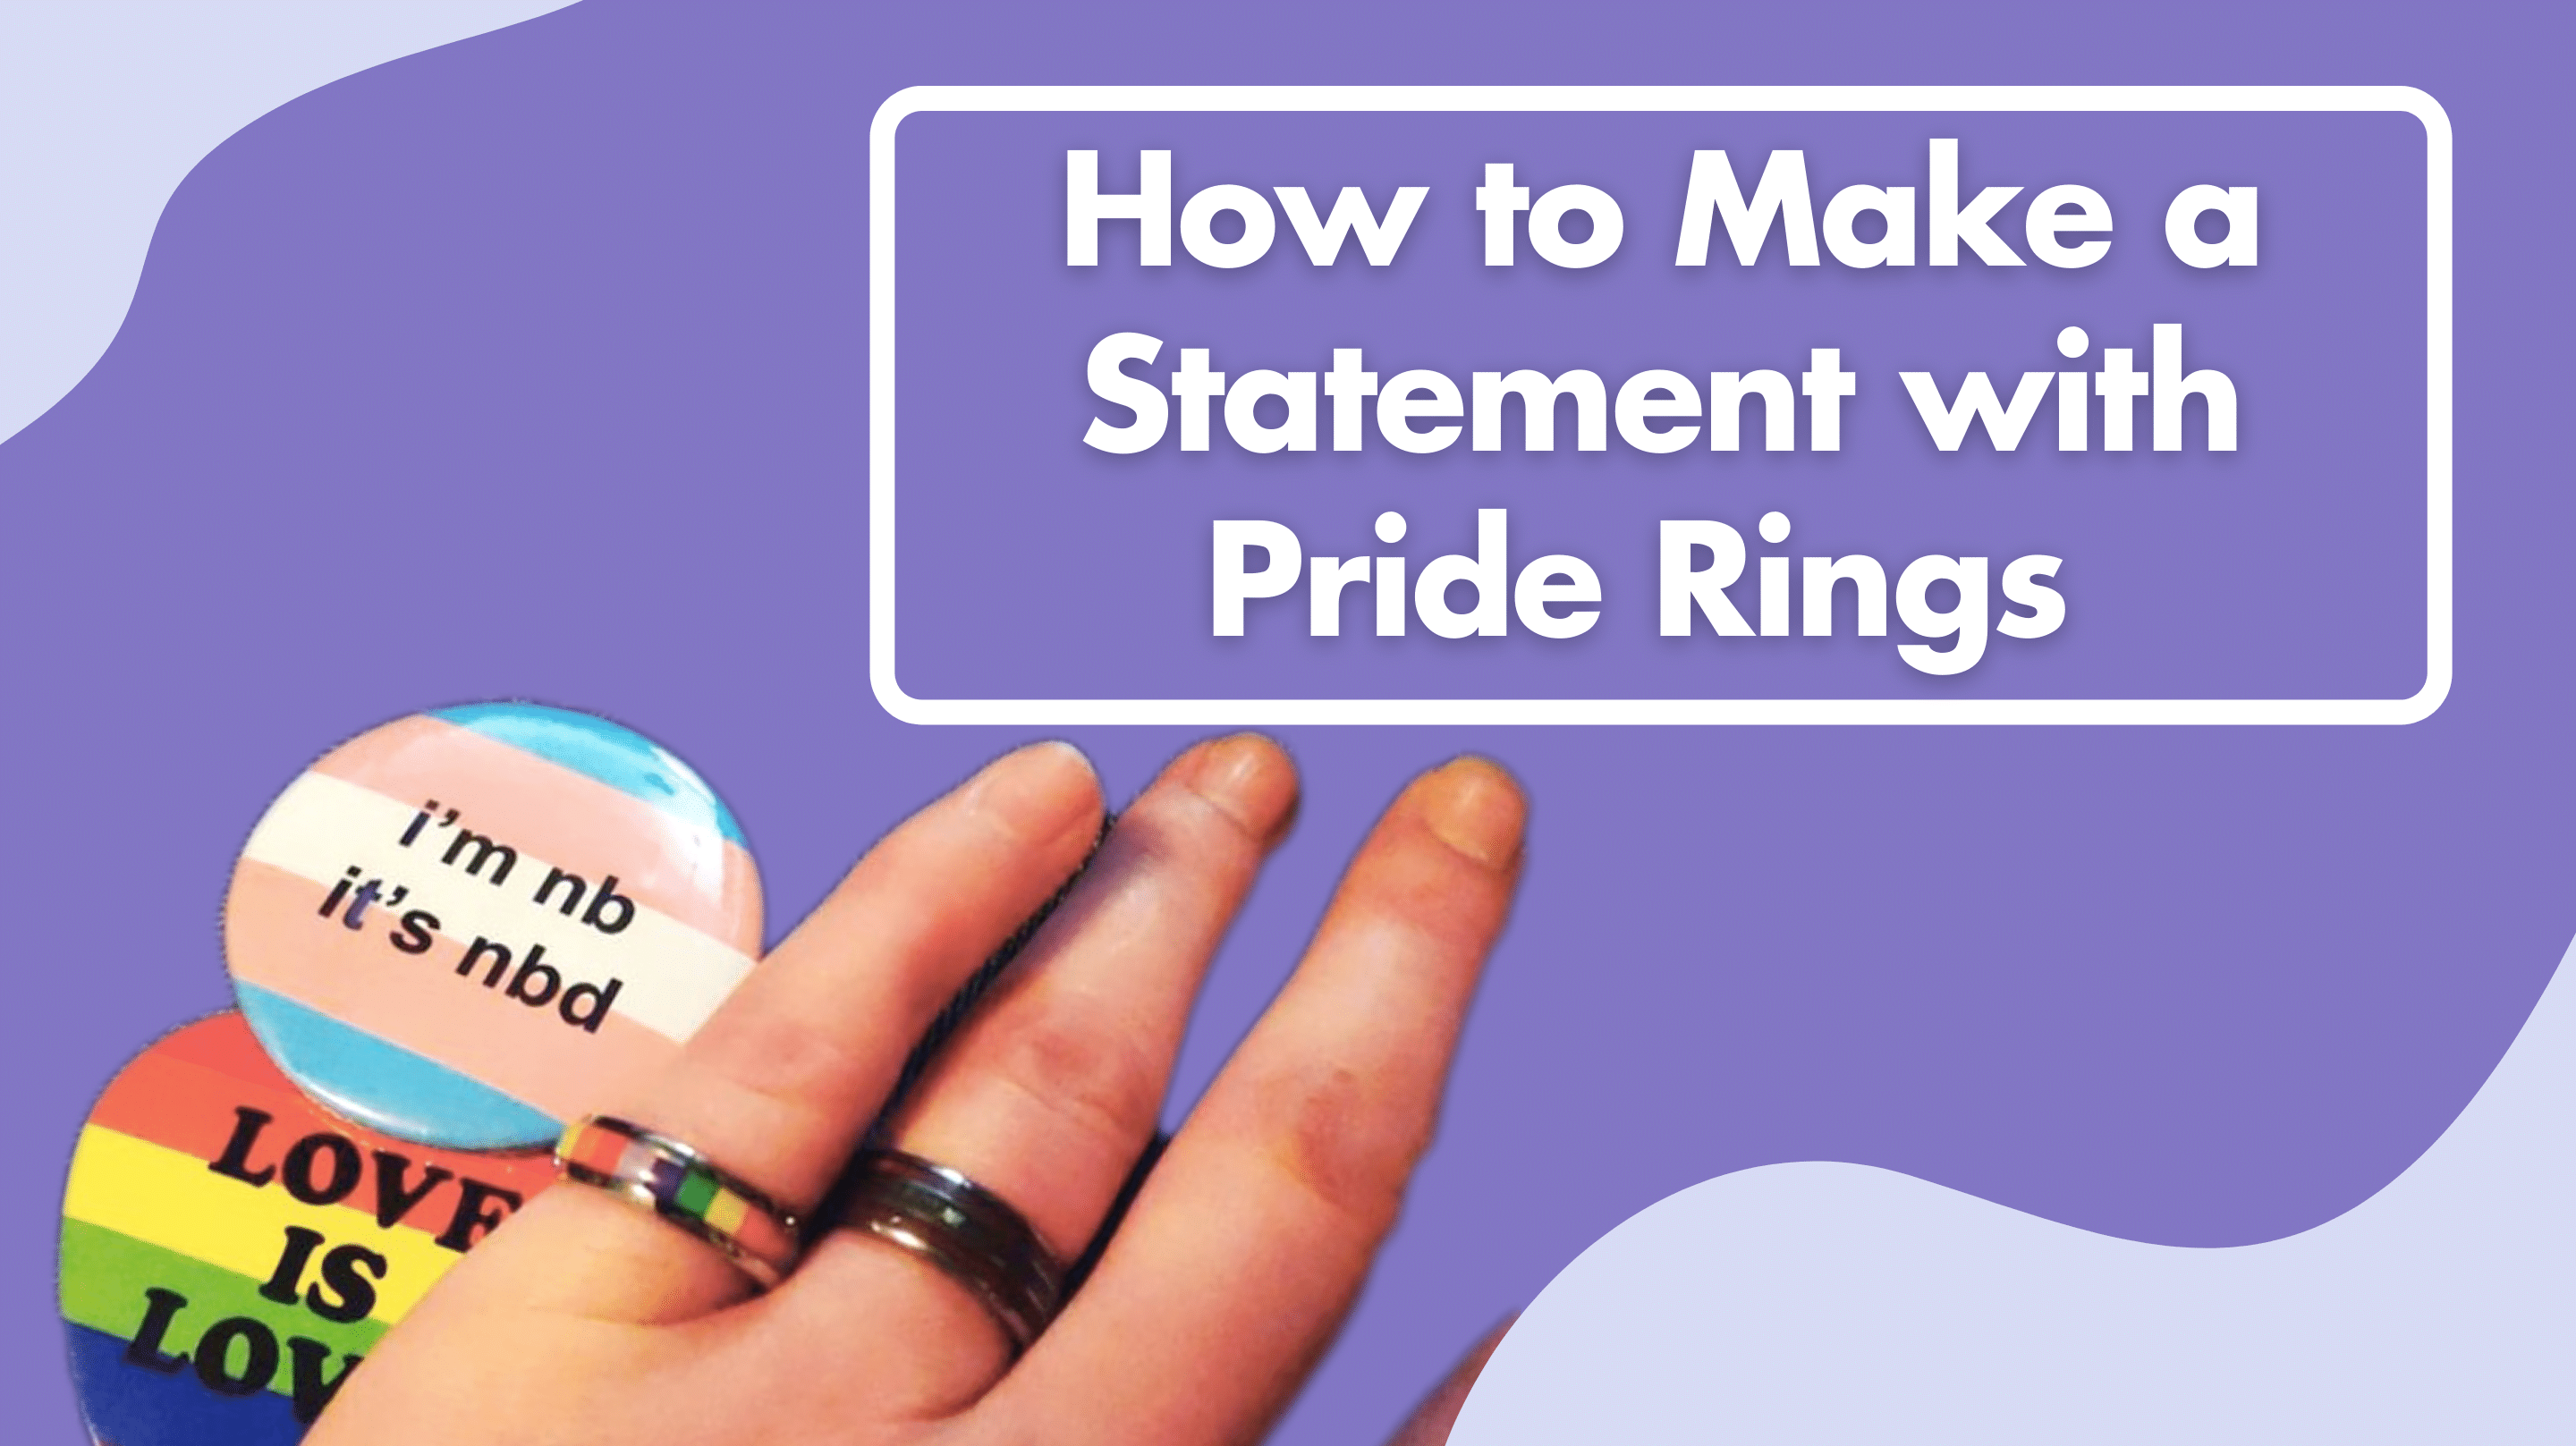 What are Pride Rings All About?